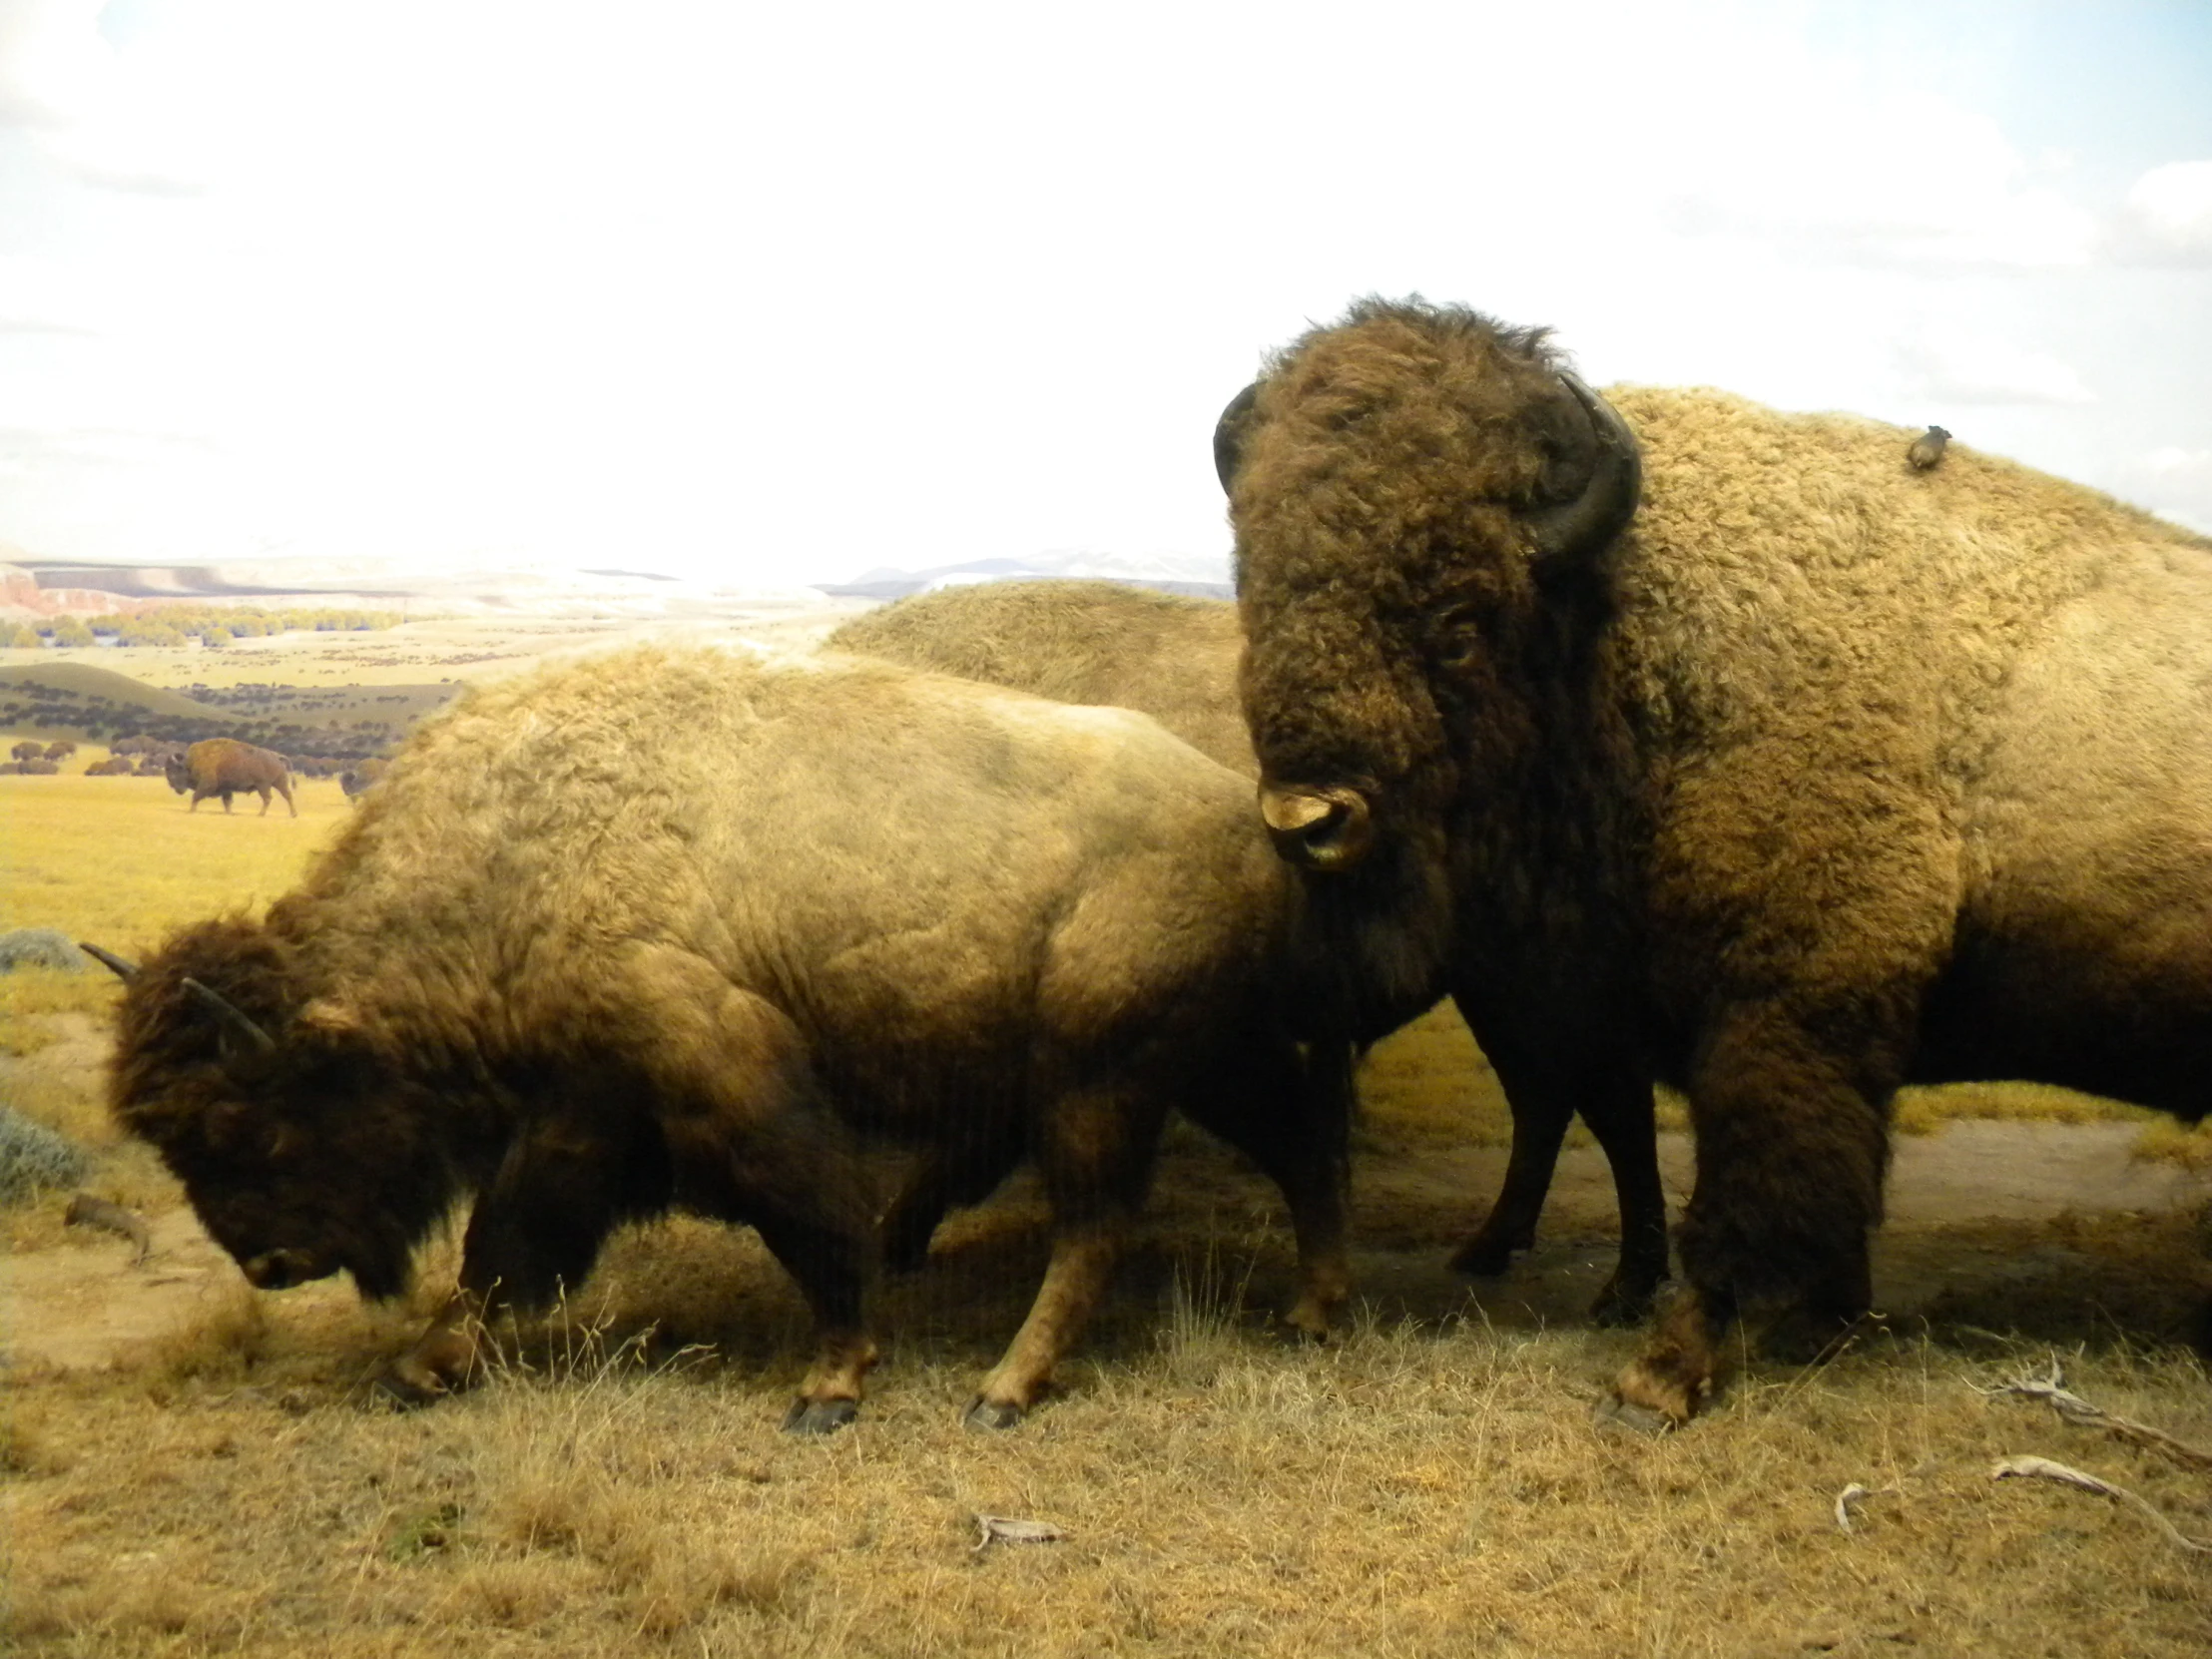 a large buffalo and a smaller bison grazing